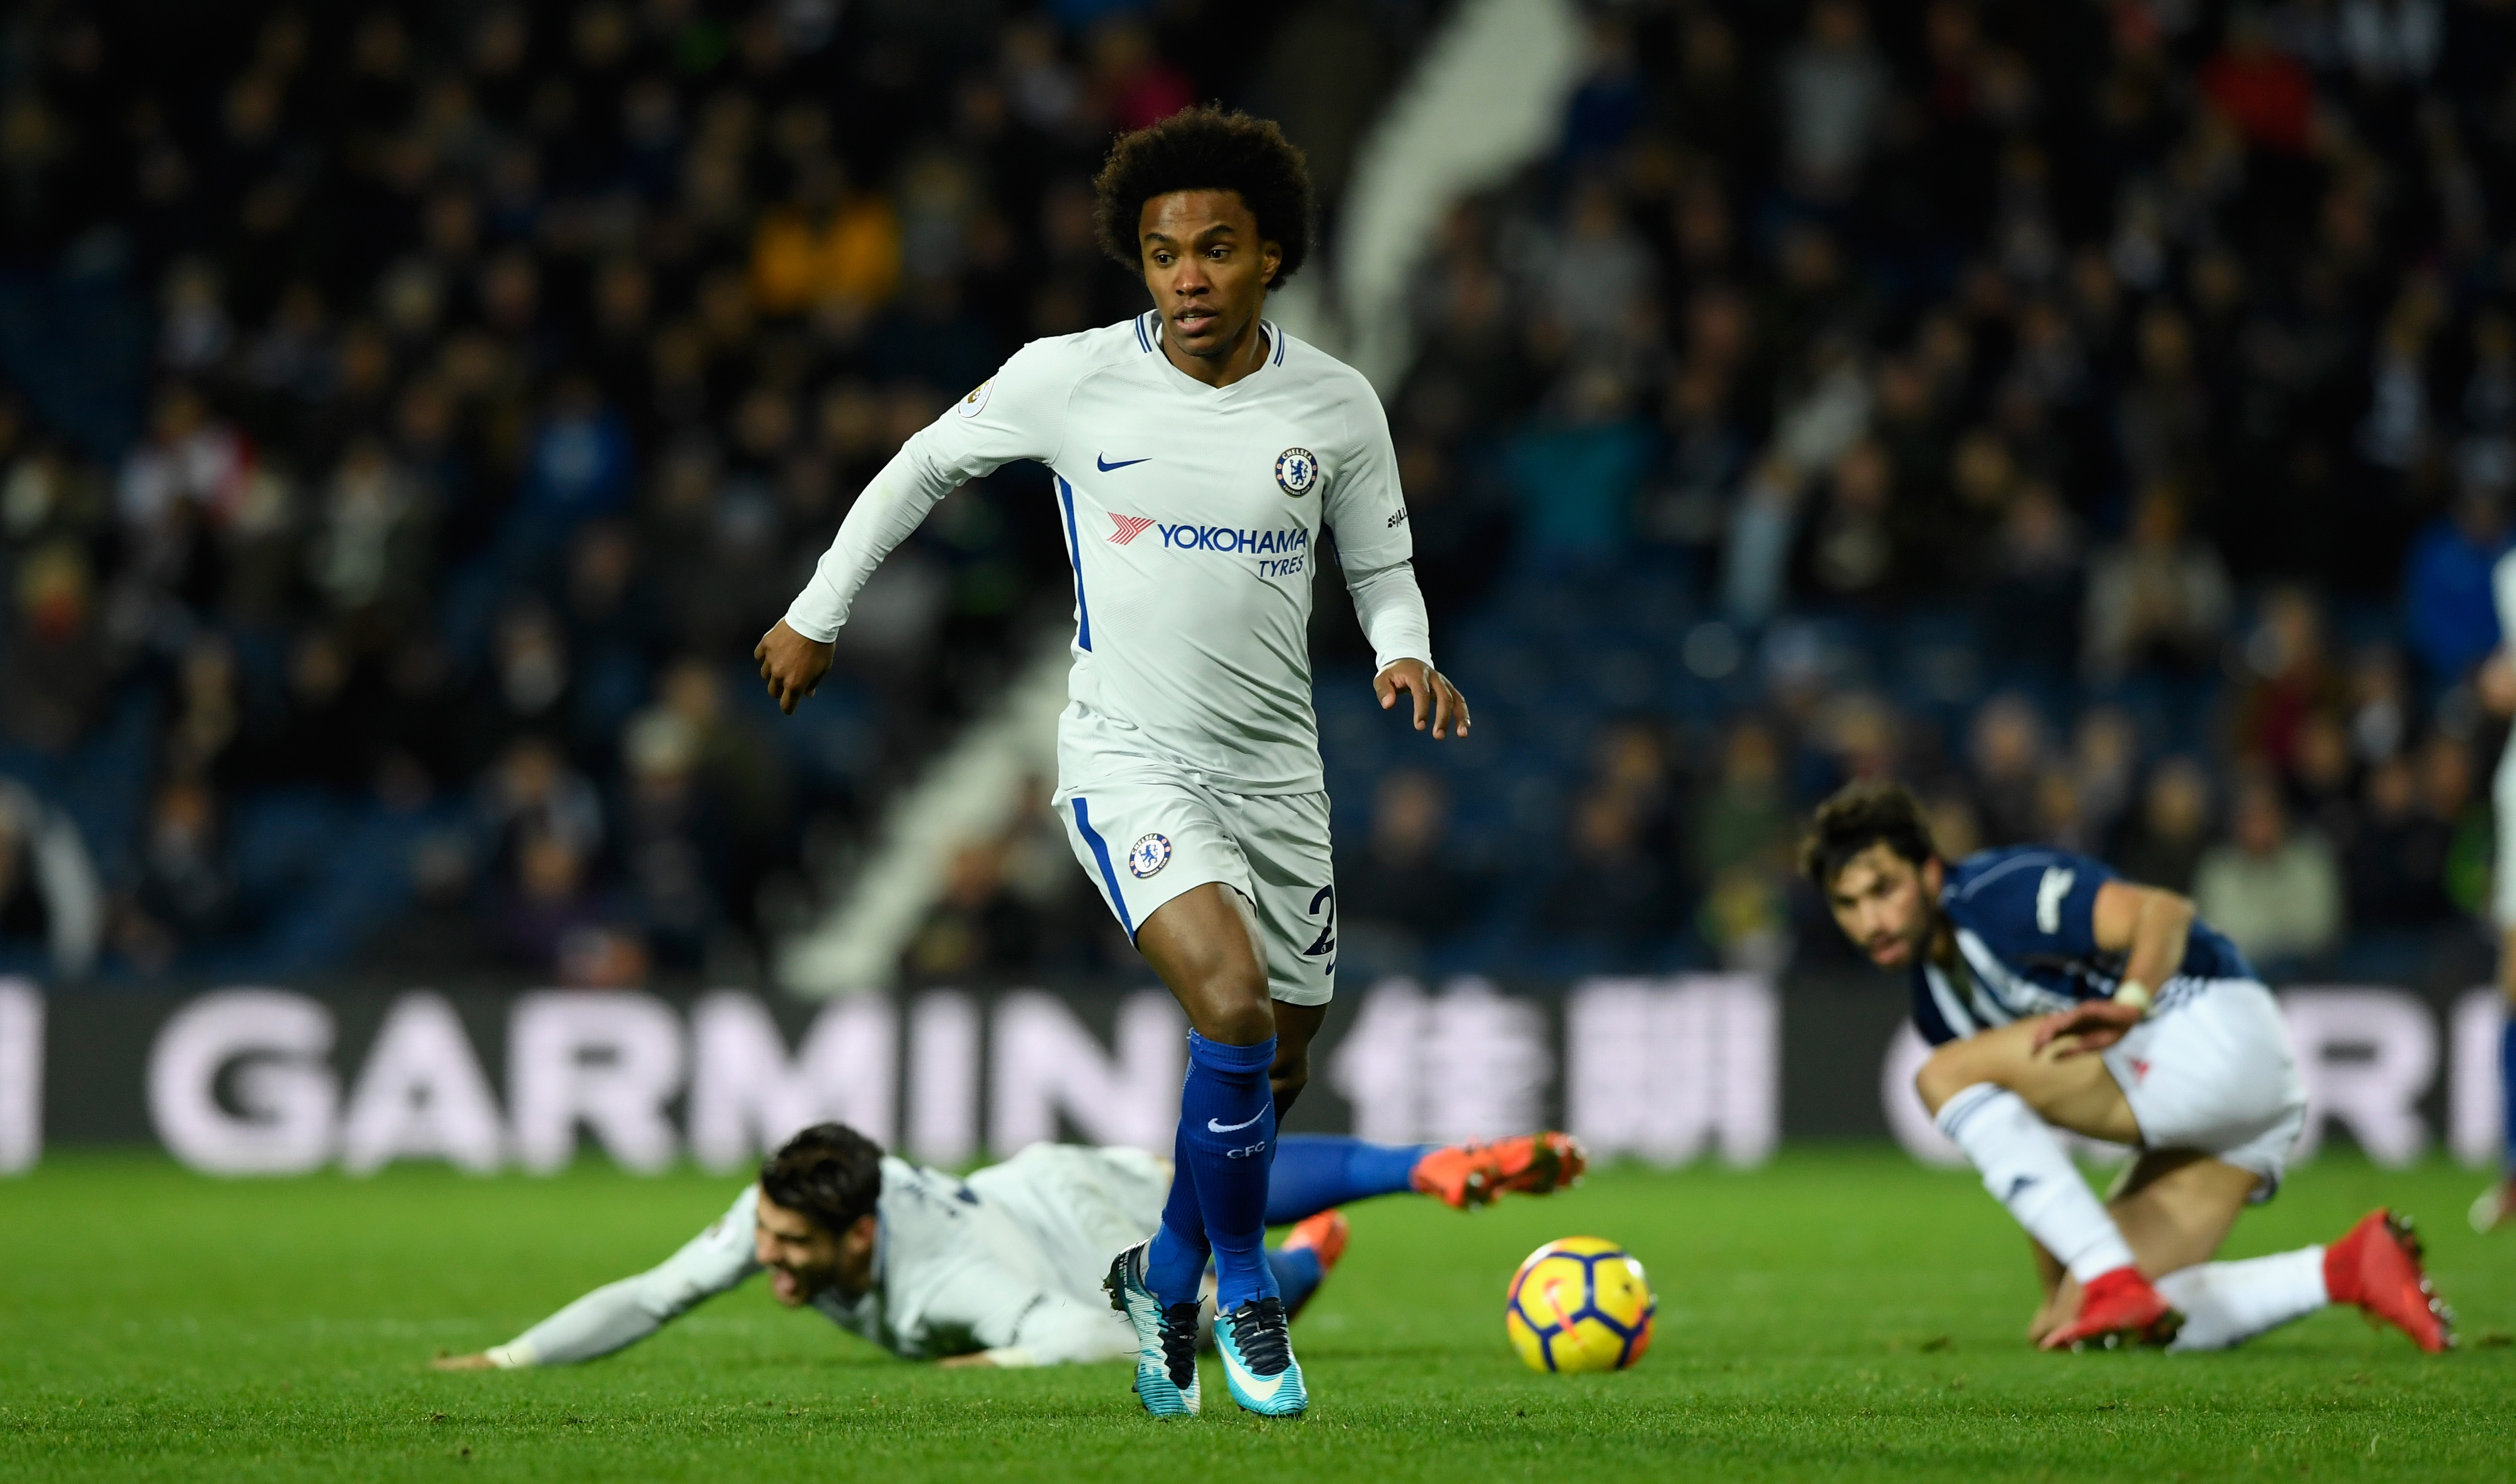 WEST BROMWICH, ENGLAND - NOVEMBER 18:  Chelsea player Willian in action during the Premier League match between West Bromwich Albion and Chelsea at The Hawthorns on November 18, 2017 in West Bromwich, England.  (Photo by Stu Forster/Getty Images)